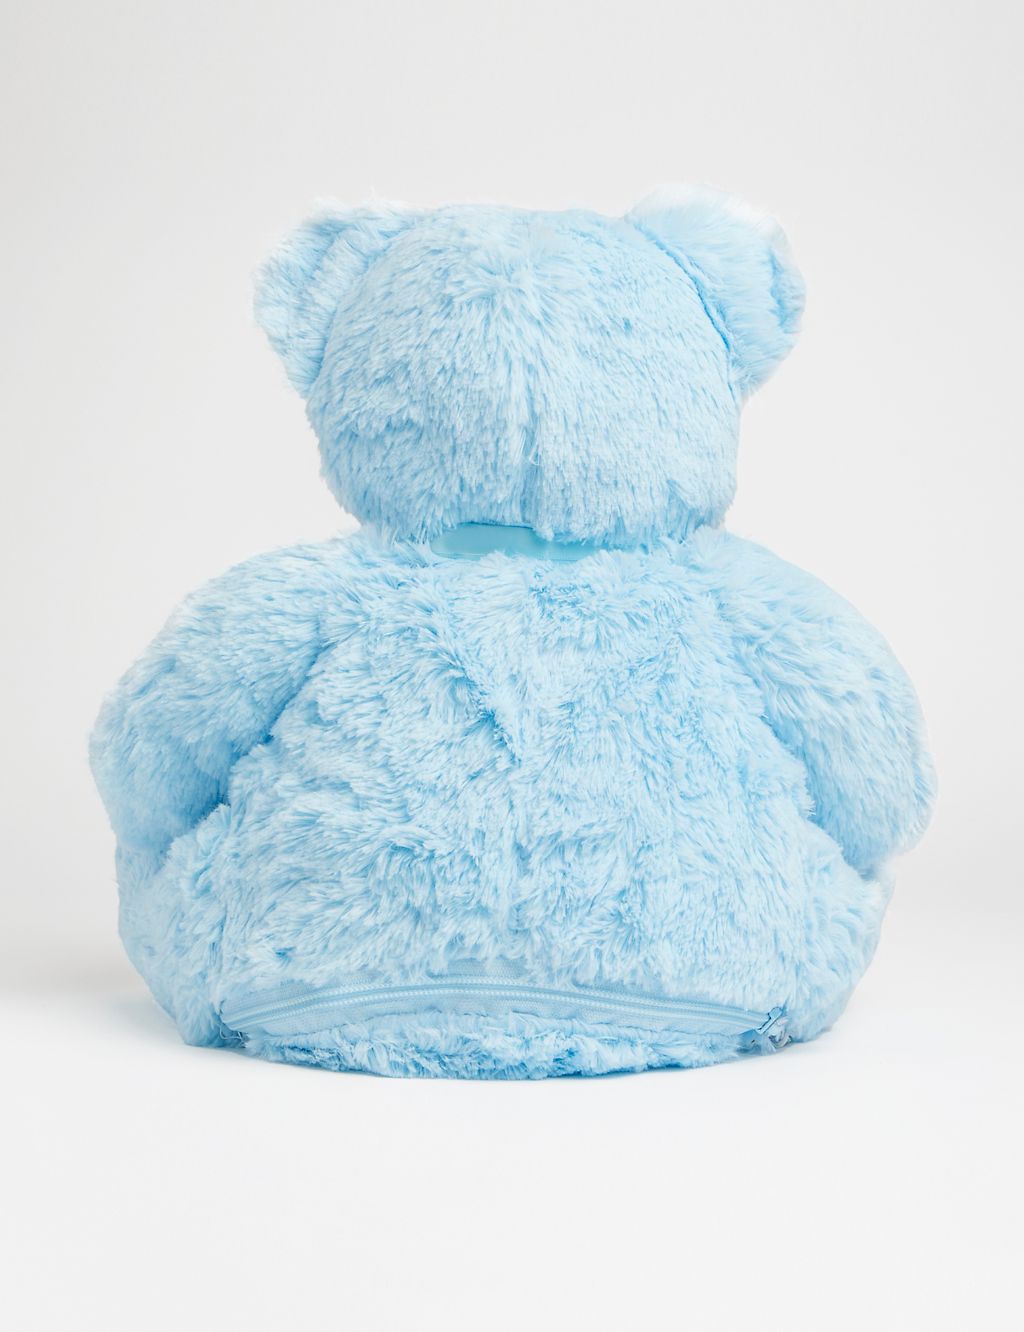 Personalised Soft Plush New Baby Bear 1 of 3